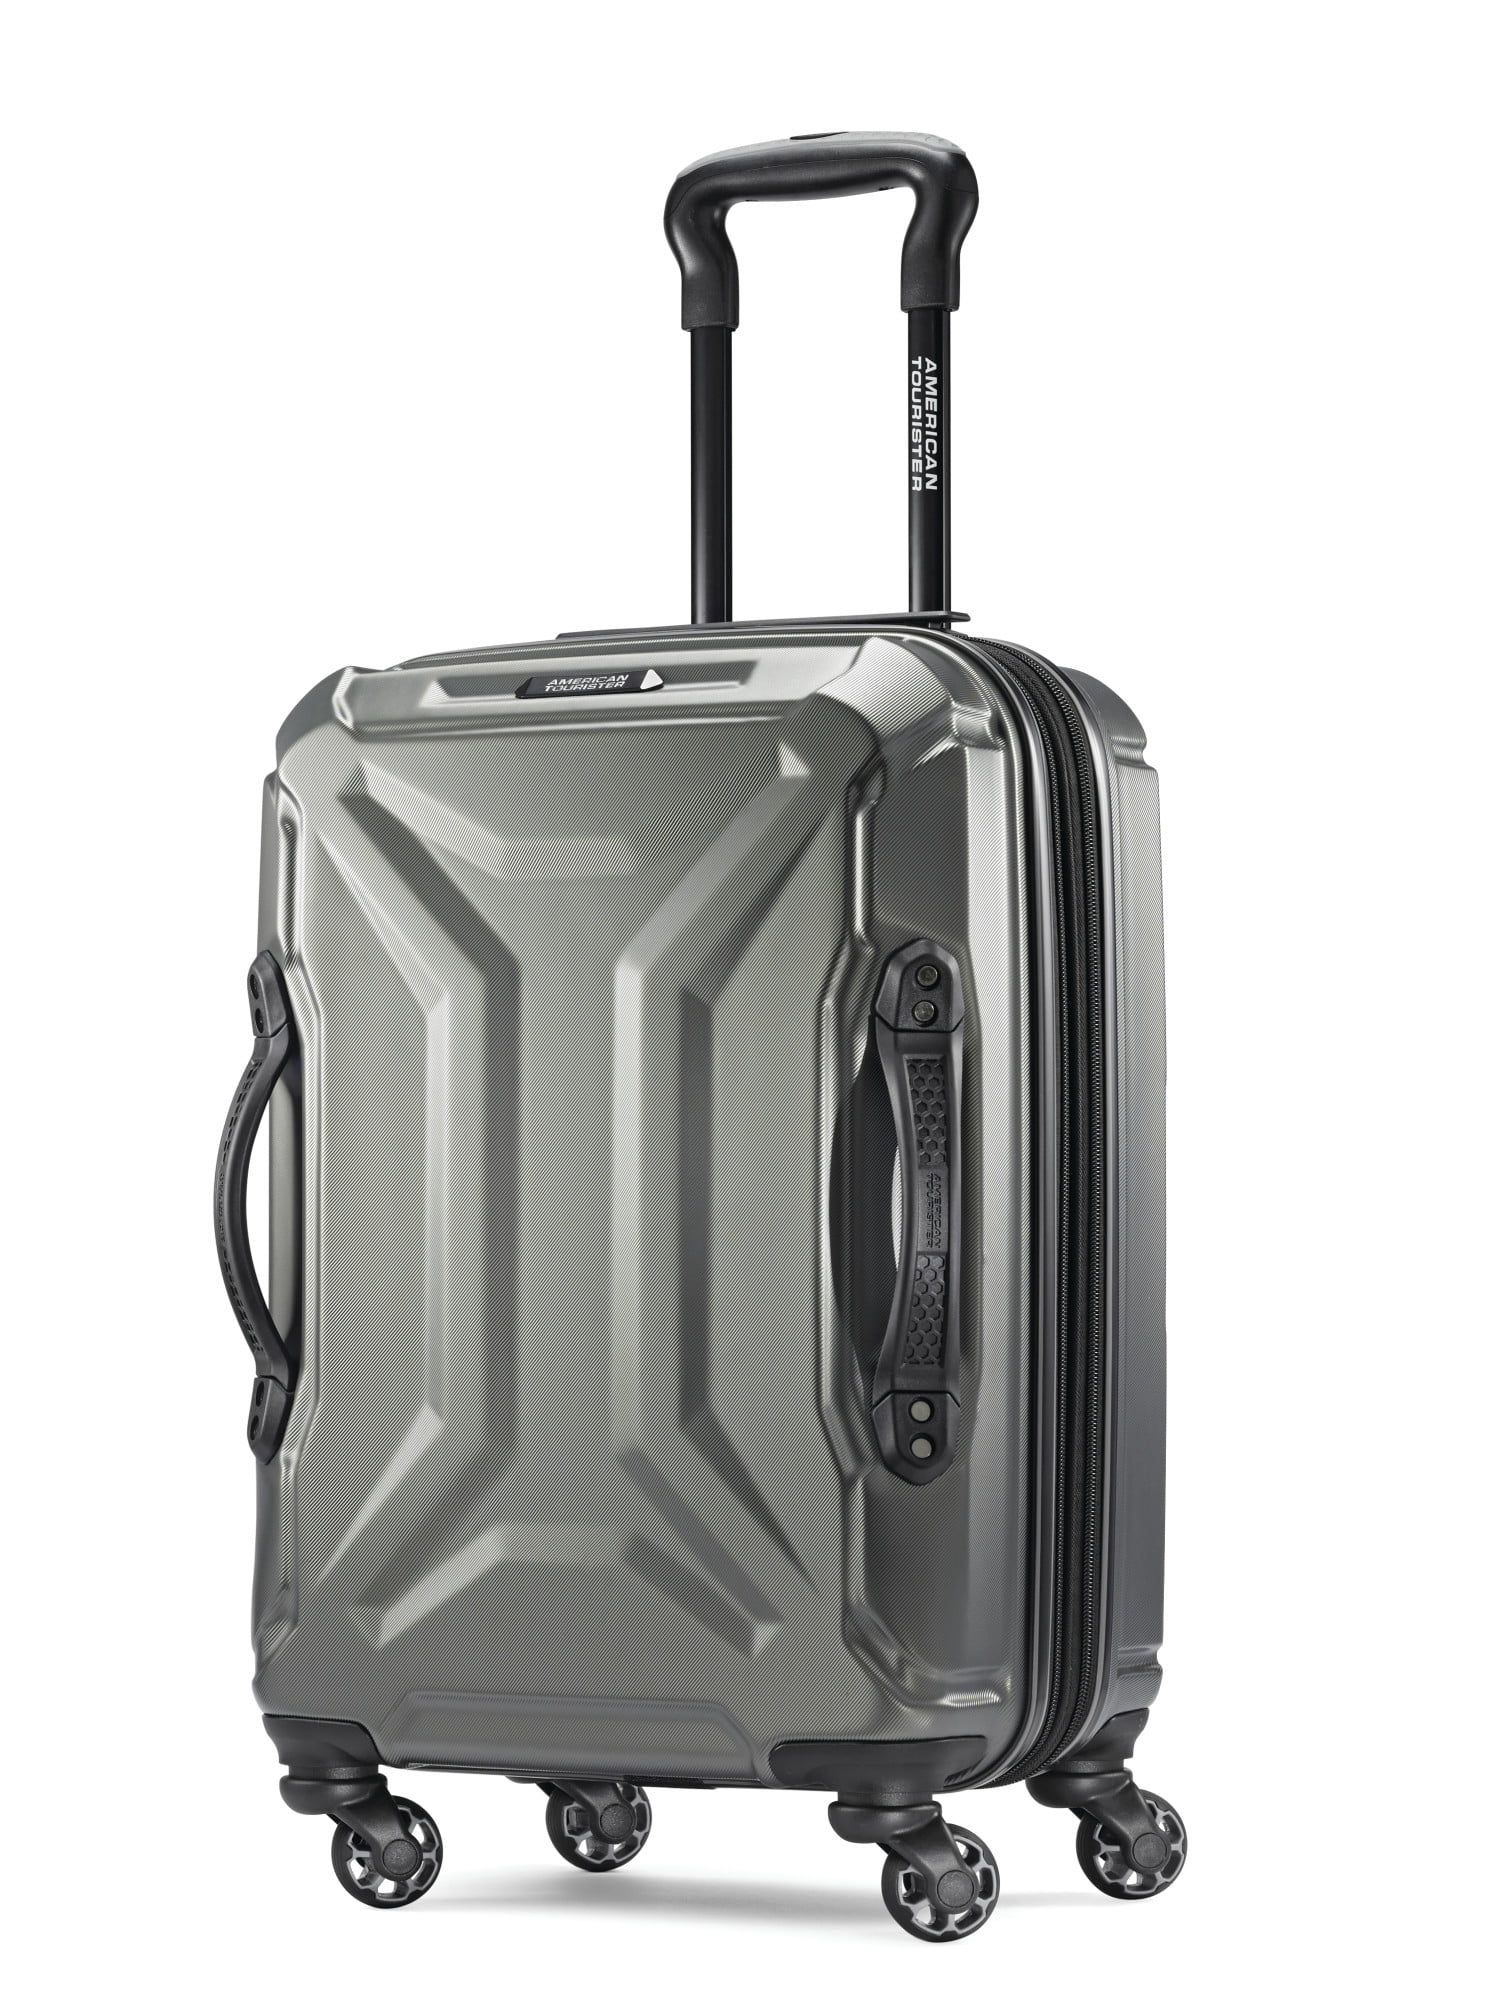 American Tourister Cargo Max 21" Hardside Spinner Luggage, Olive | Walmart (US)